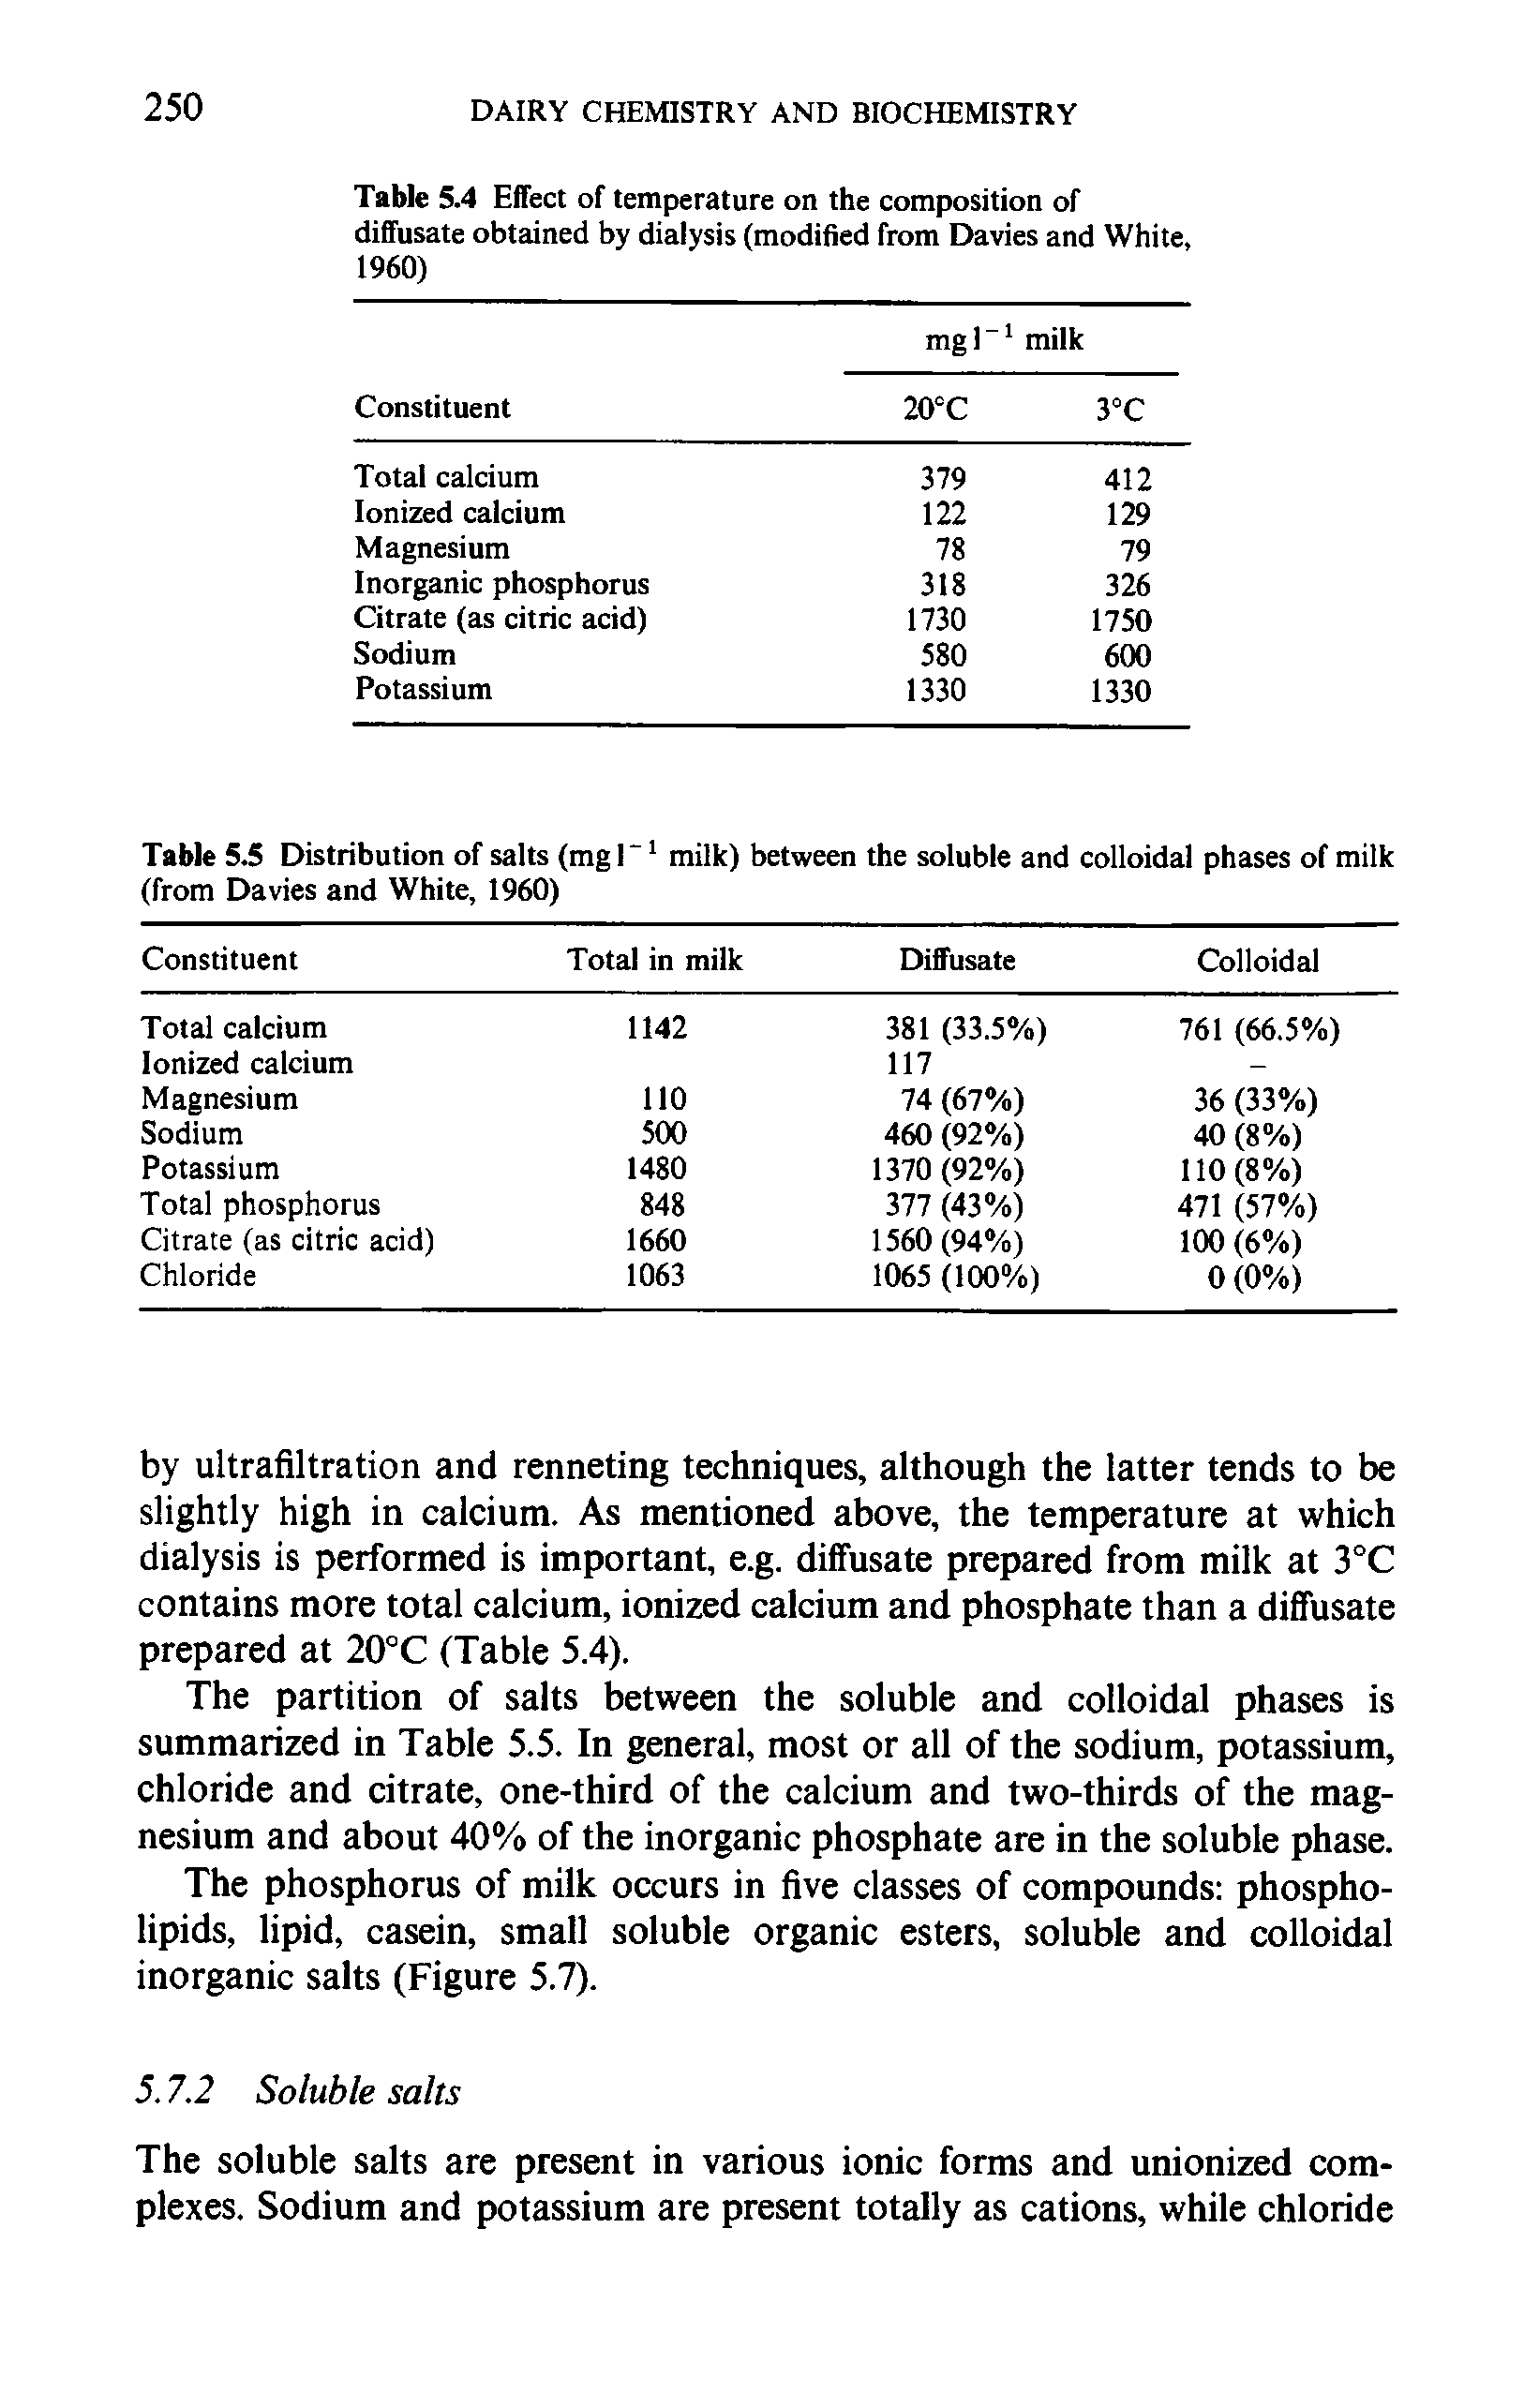 Table 5.5 Distribution of salts (mg I 1 milk) between the soluble and colloidal phases of milk (from Davies and White, 1960)...